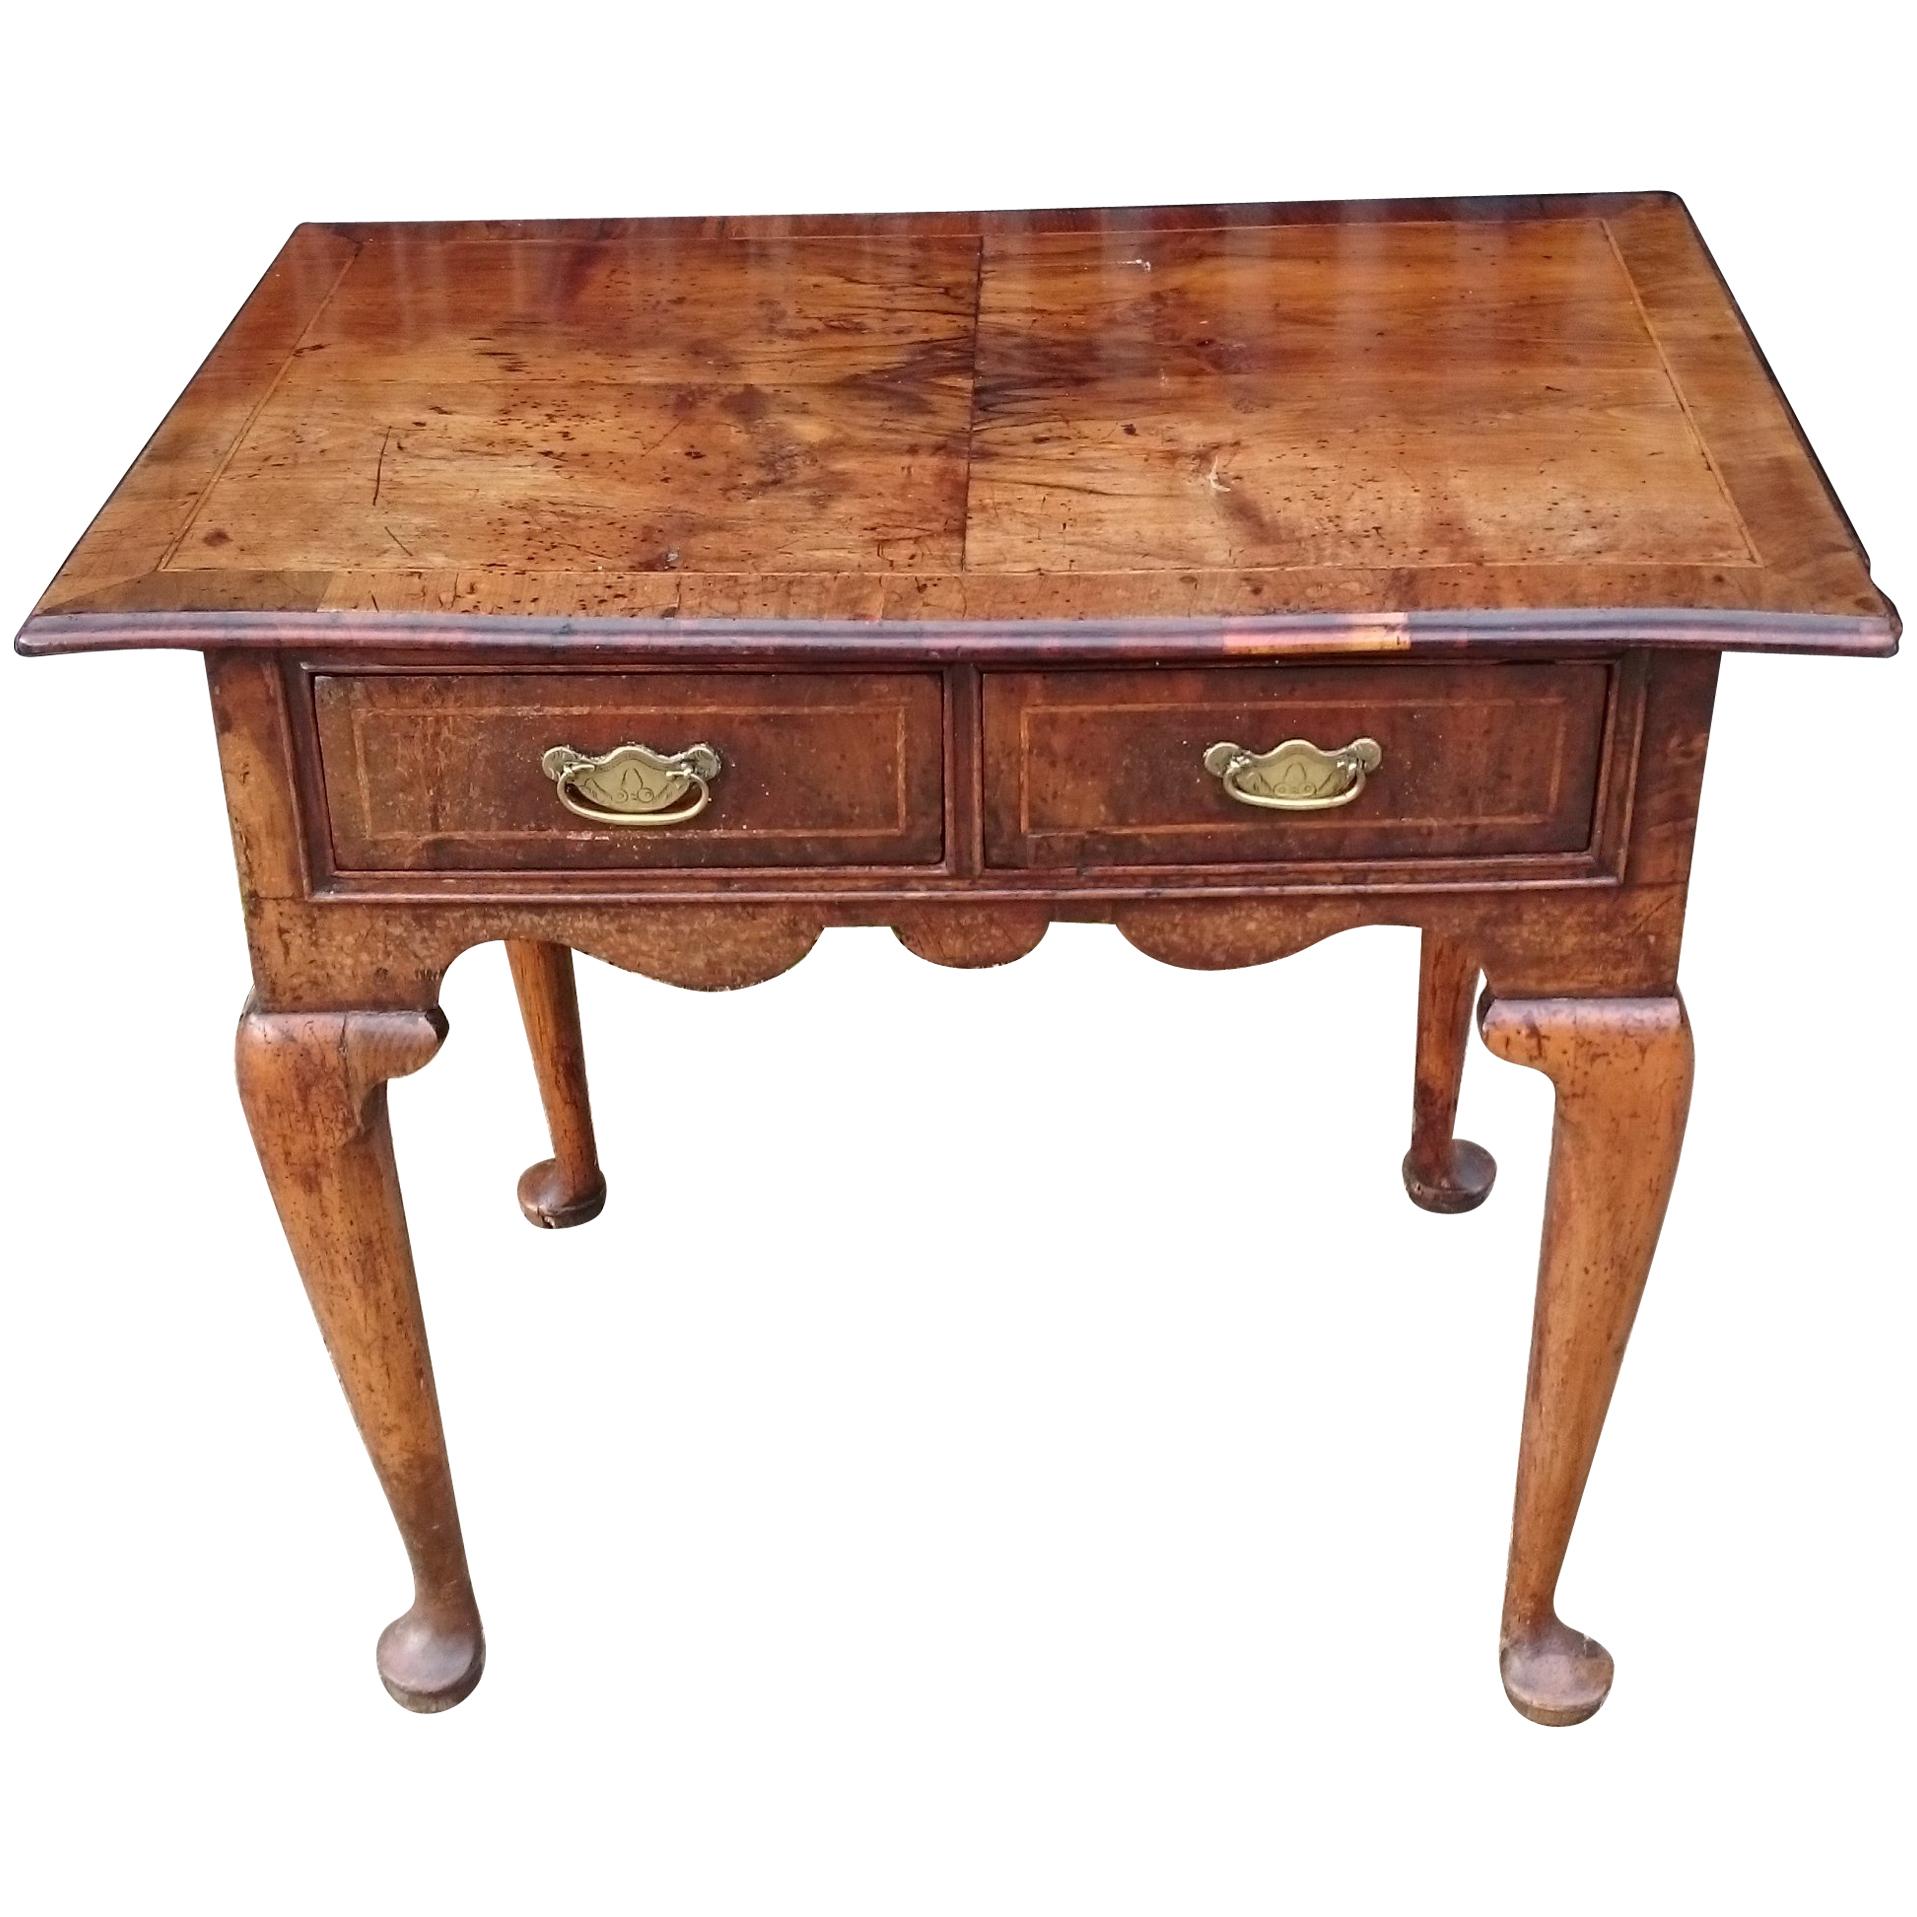 Early 18th Century George I Period Walnut Low Boy Side Table For Sale